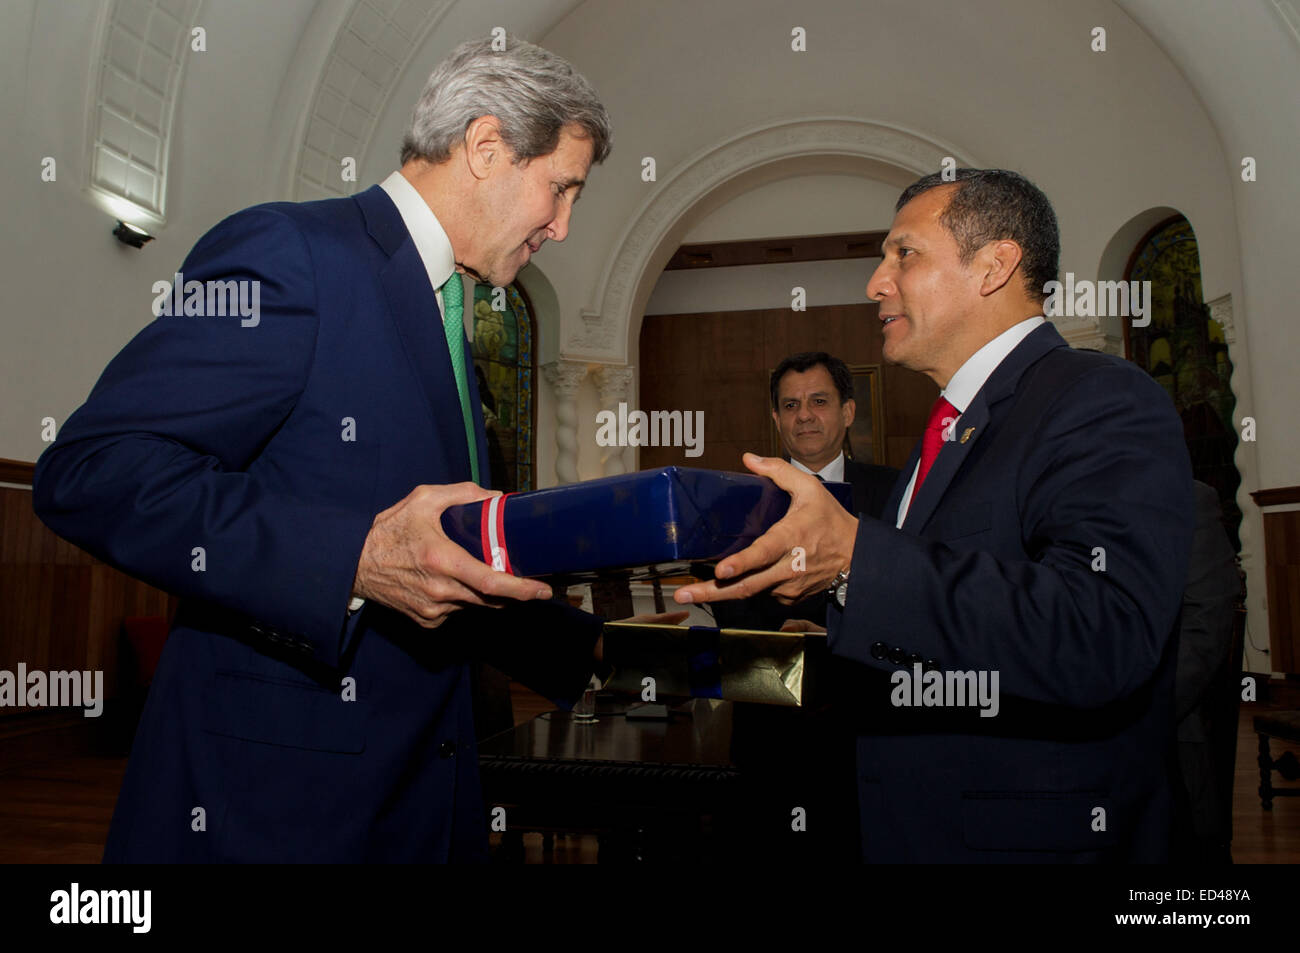 U.S. Secretary of State John Kerry and President Ollanta Humala of Peru exchange gifts following a bilateral meeting in the Presidential Palace in Lima, Peru, on Dec. 11, 2014, and after the Secretary addressed the 20th session of the Conference of the Parties to the United Nations Framework Convention on Climate Change. Stock Photo